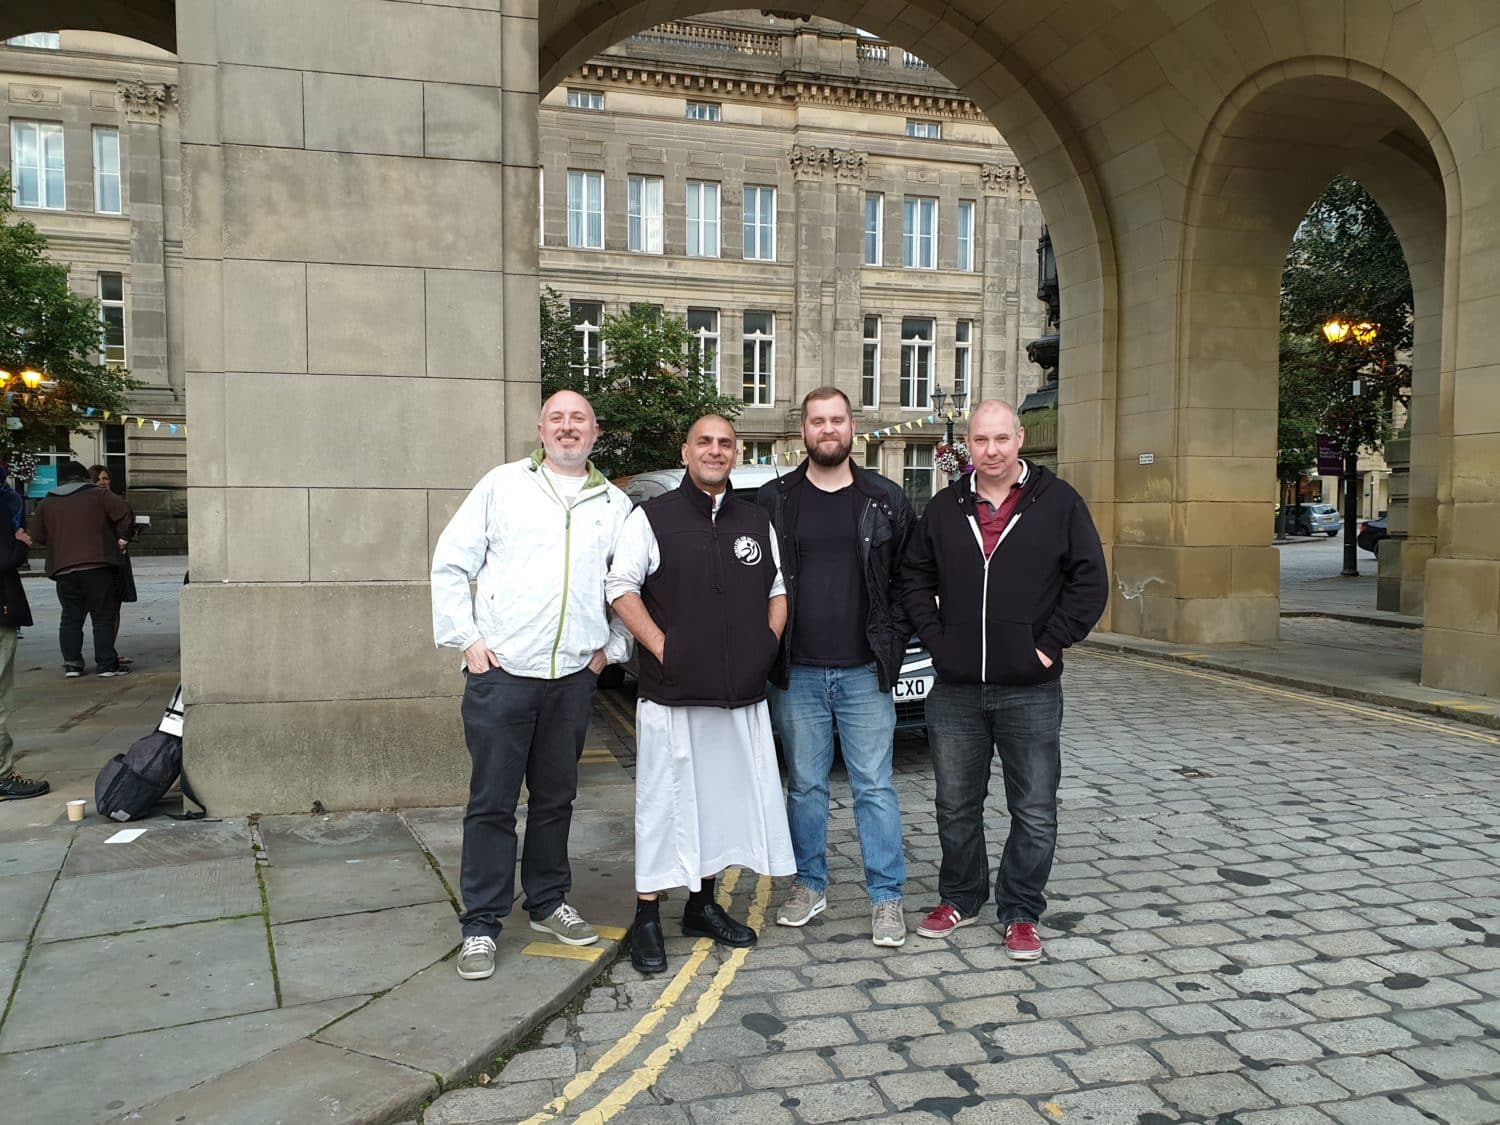 Bolton & Manchester Masons donate £1000 to Homeless Aid UK